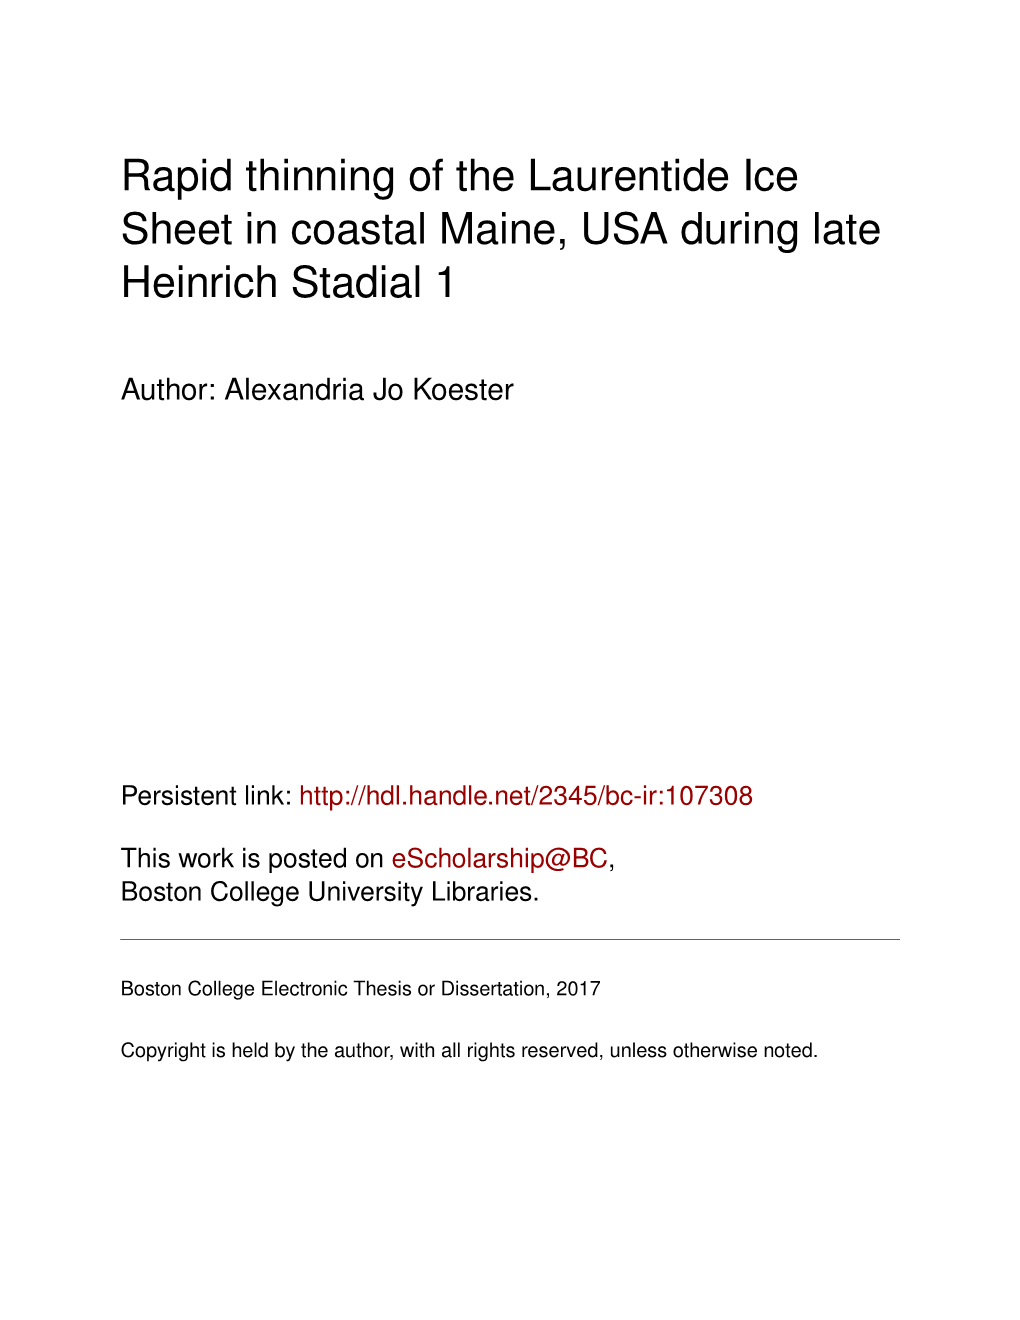 Rapid Thinning of the Laurentide Ice Sheet in Coastal Maine, USA During Late Heinrich Stadial 1